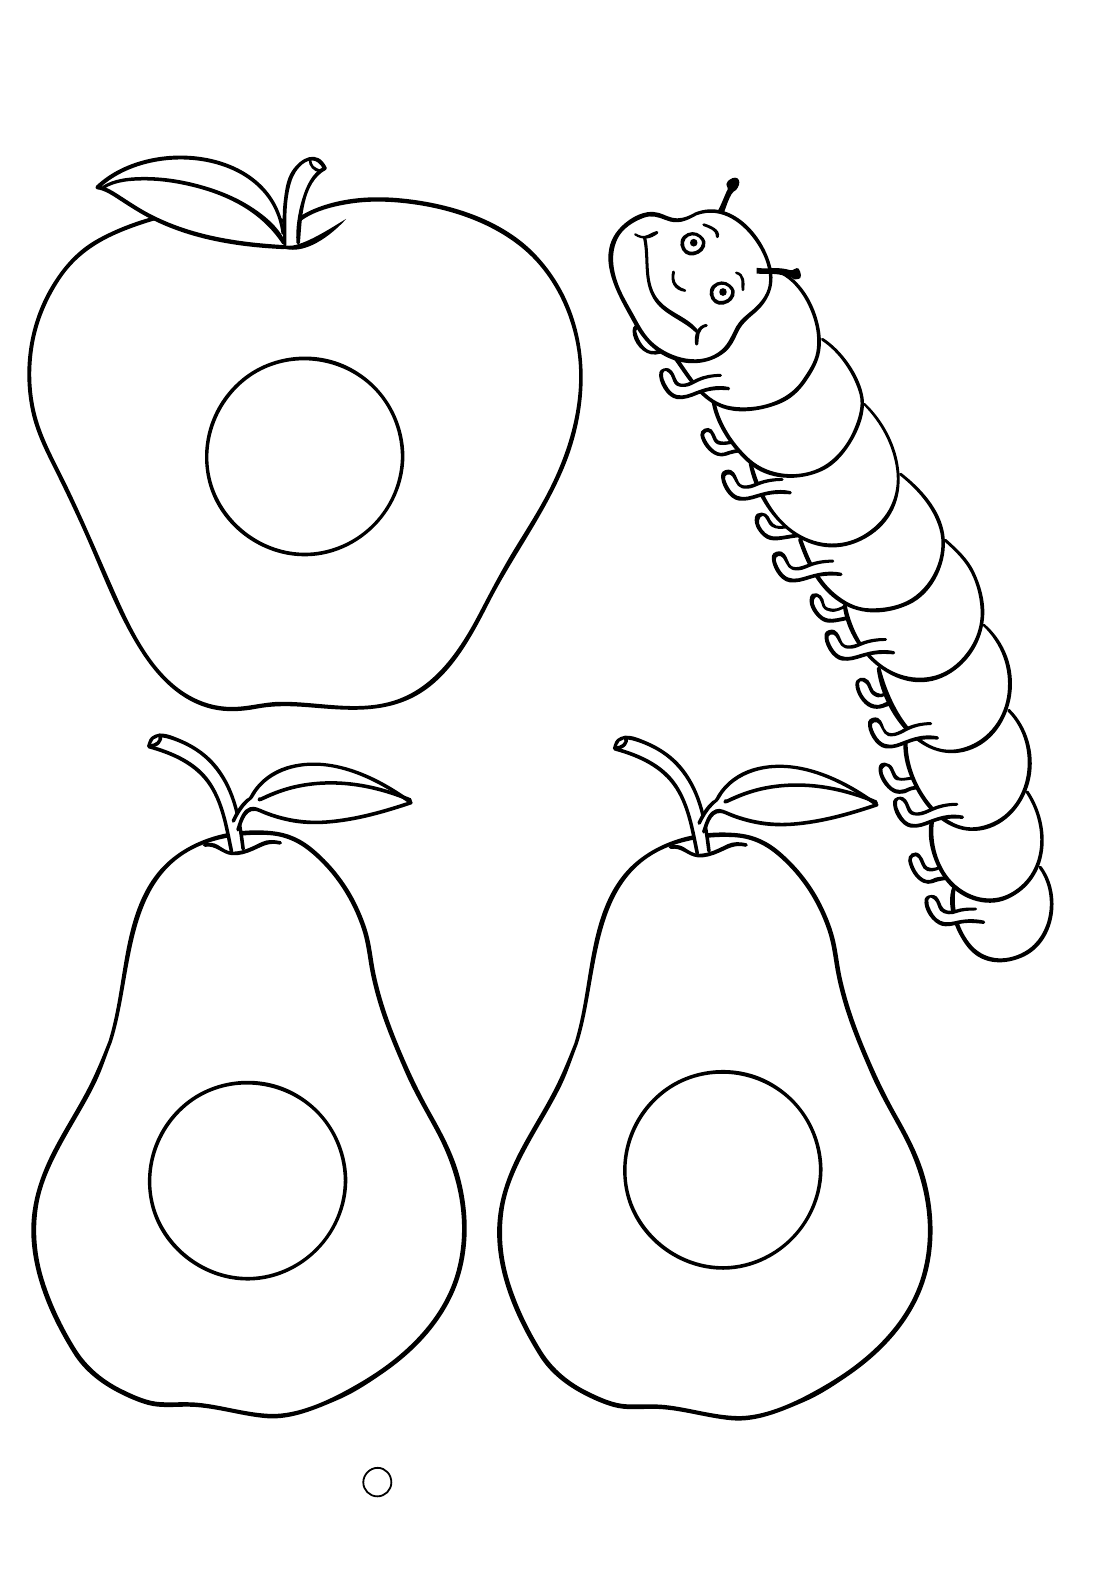 pictures to print out and colour 40 free printable lol surprise dolls coloring pages cool colour and print out pictures to 